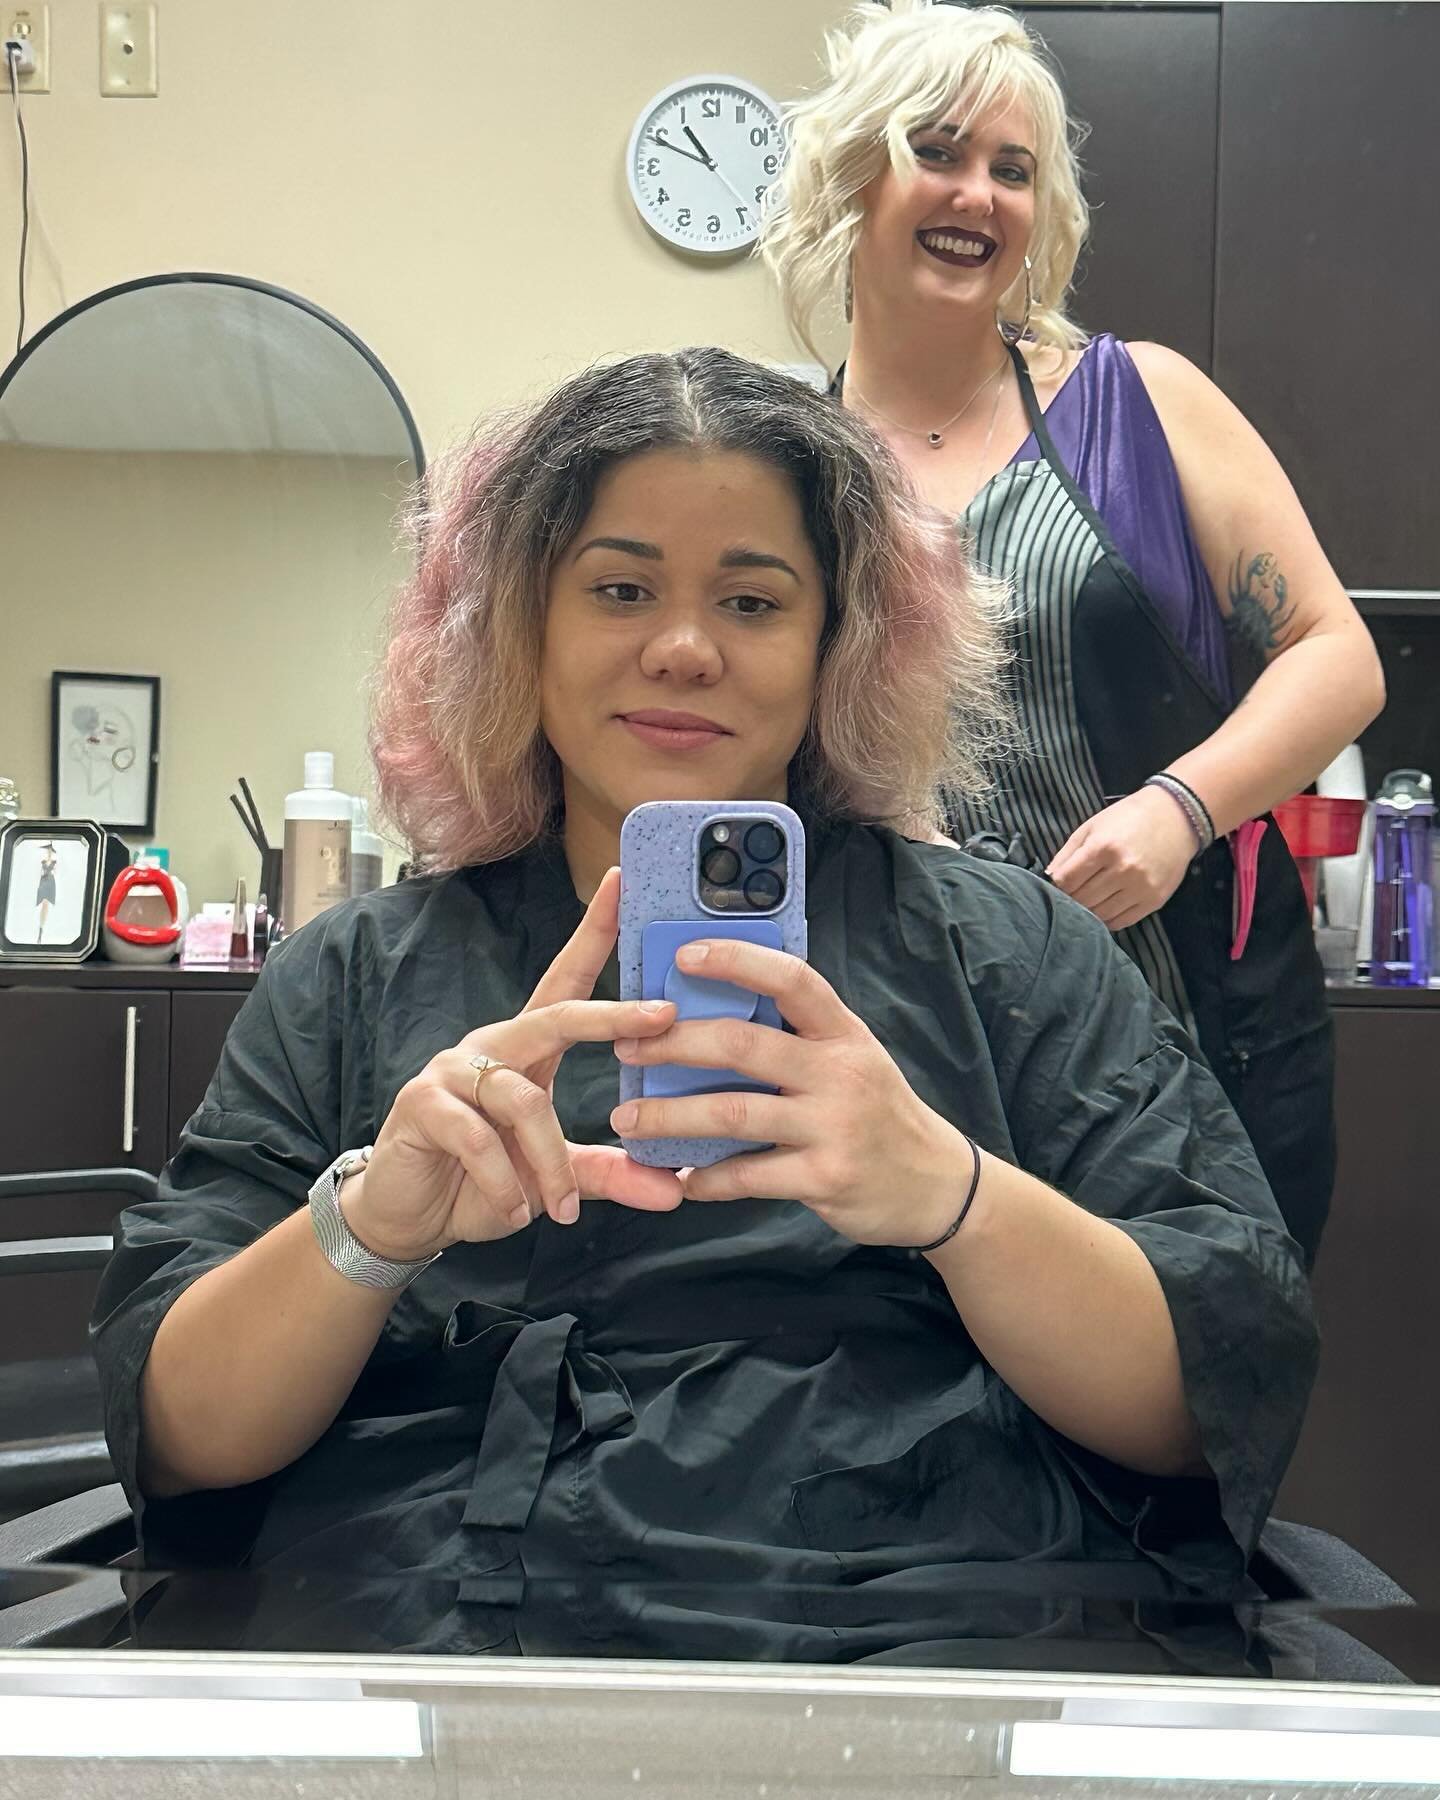 Great times at @rue.black.salon finally getting rid of my faded reds/pinks and ending the year with vivid hair! We&rsquo;ve talked about trying orange hues a few times and I&rsquo;ve been hesitant each time. I finally decided to give it a go and I lo